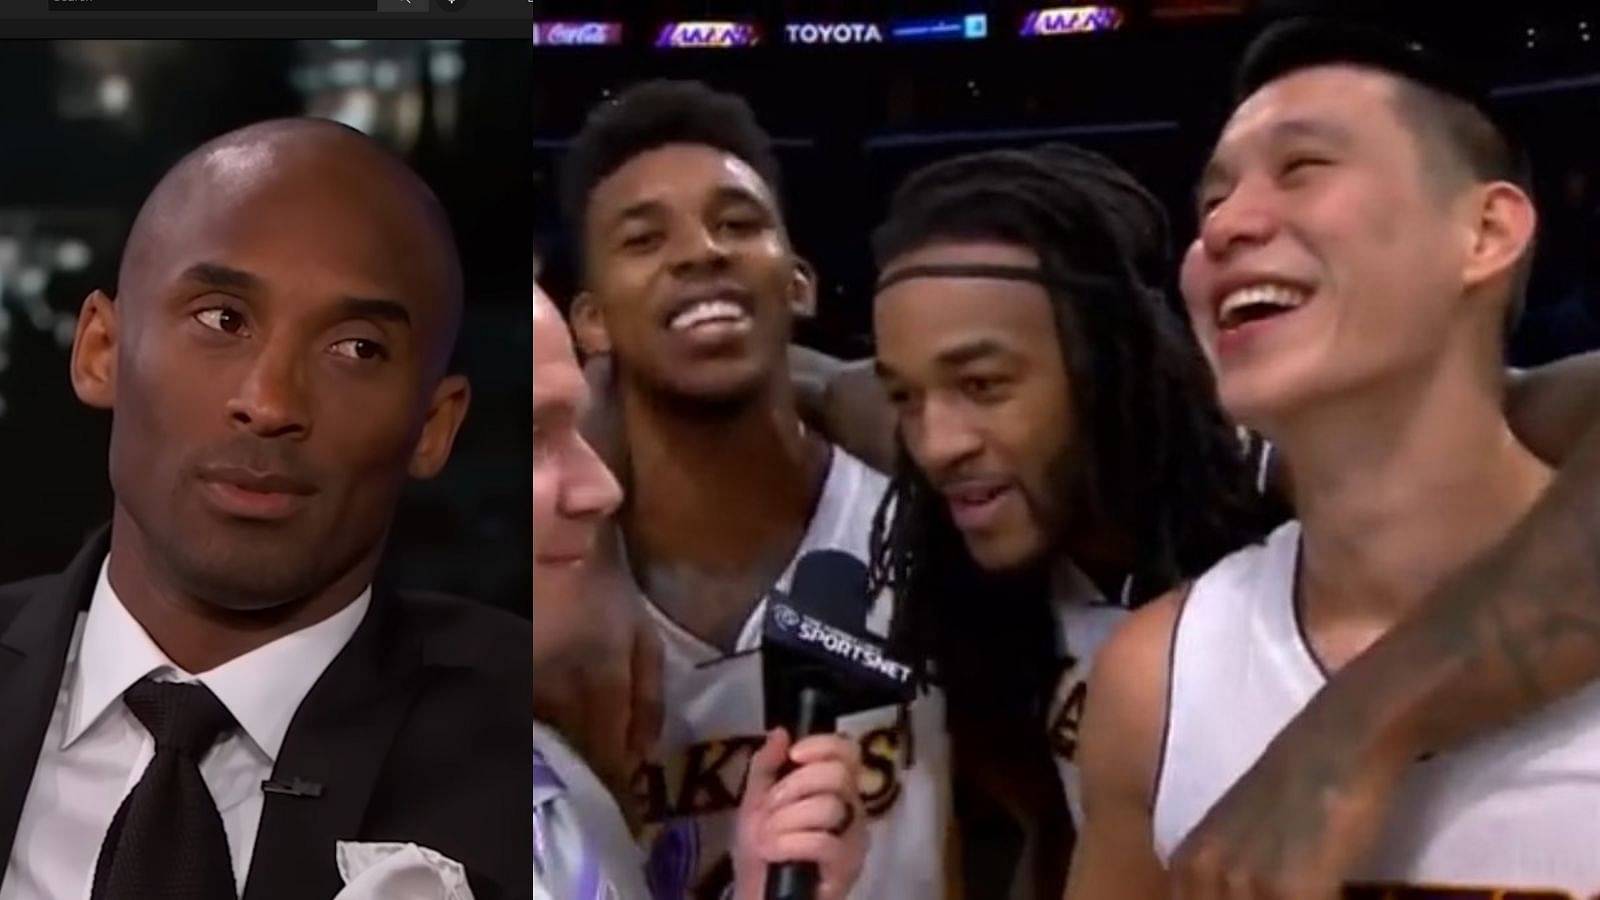 Watching Kobe Bryant cry, that was sad!": Nick Young remembers the Black Mamba and his final moments as a Laker